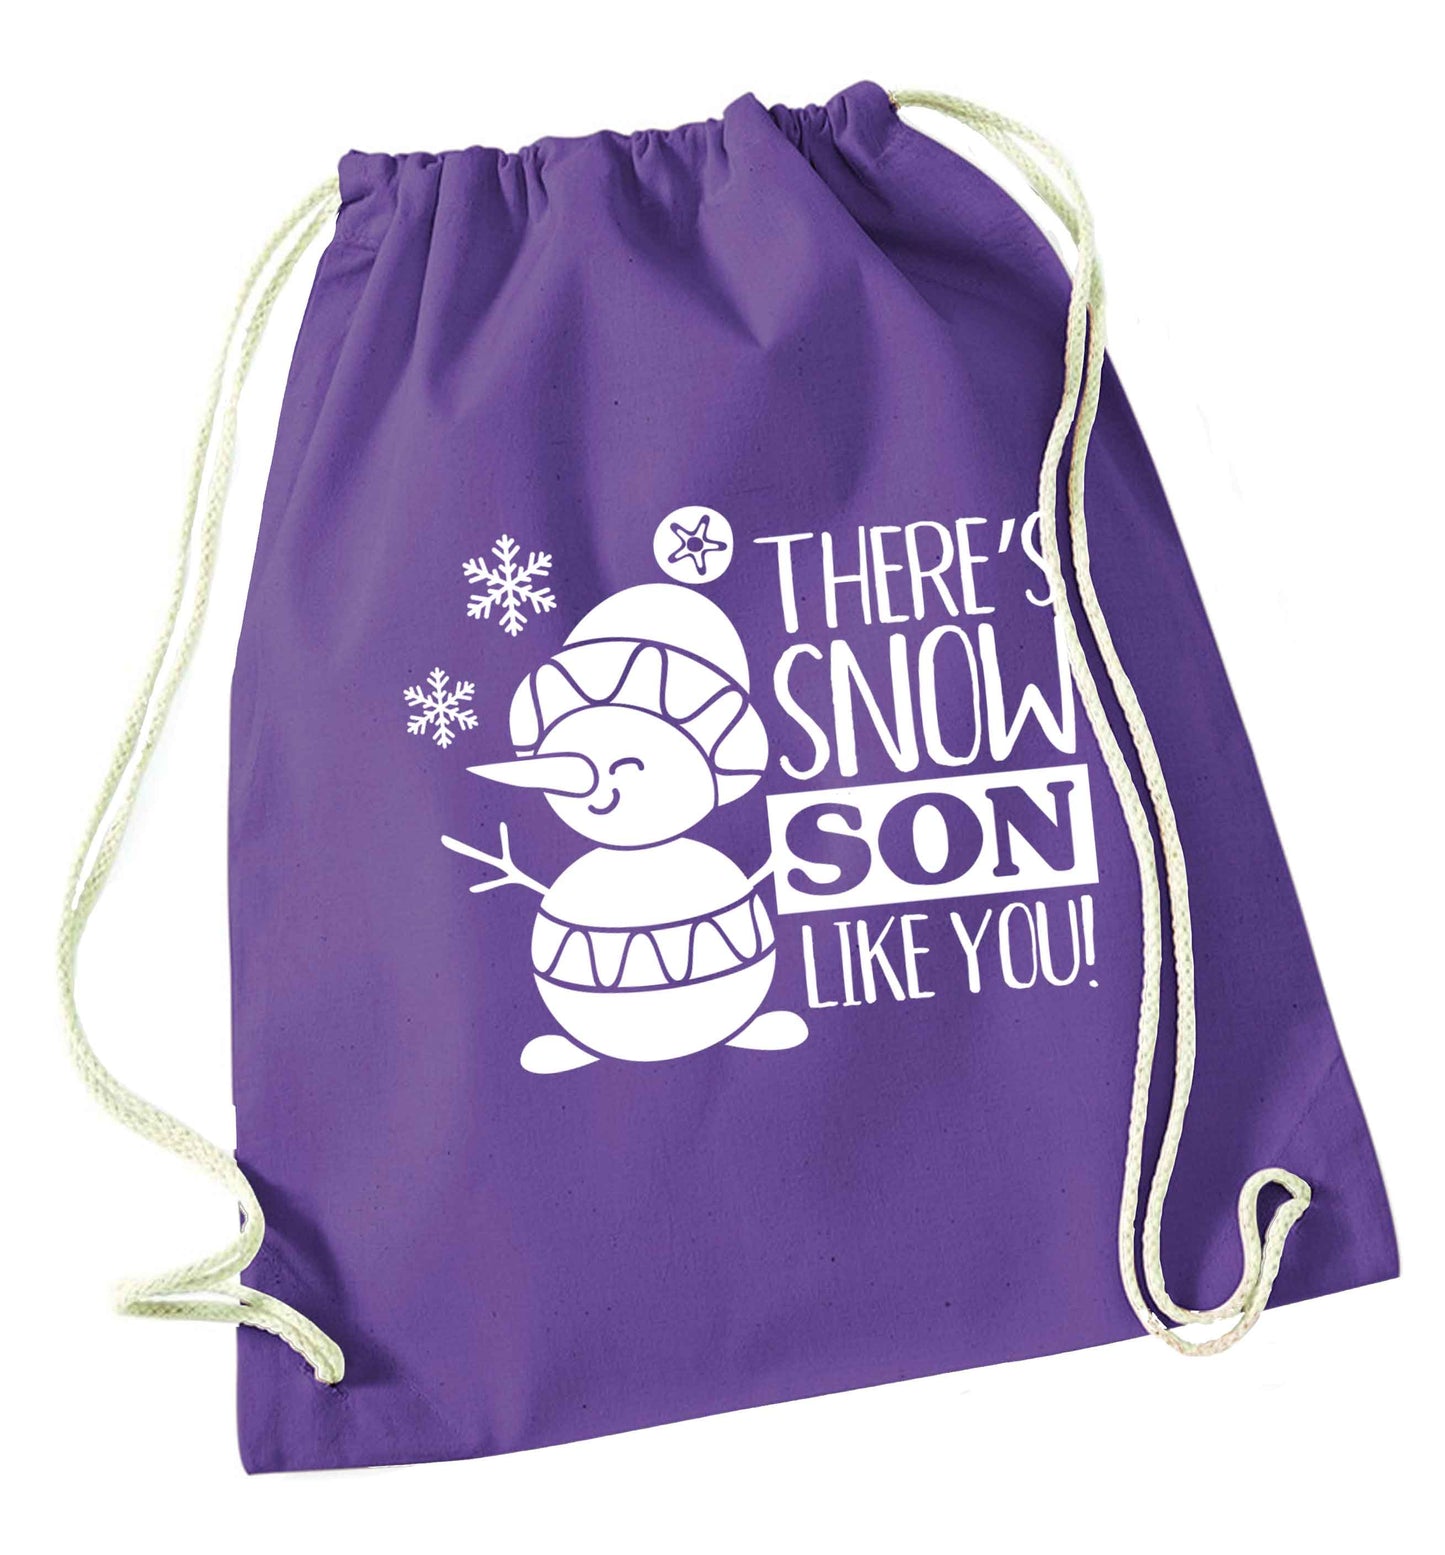 There's snow son like you purple drawstring bag